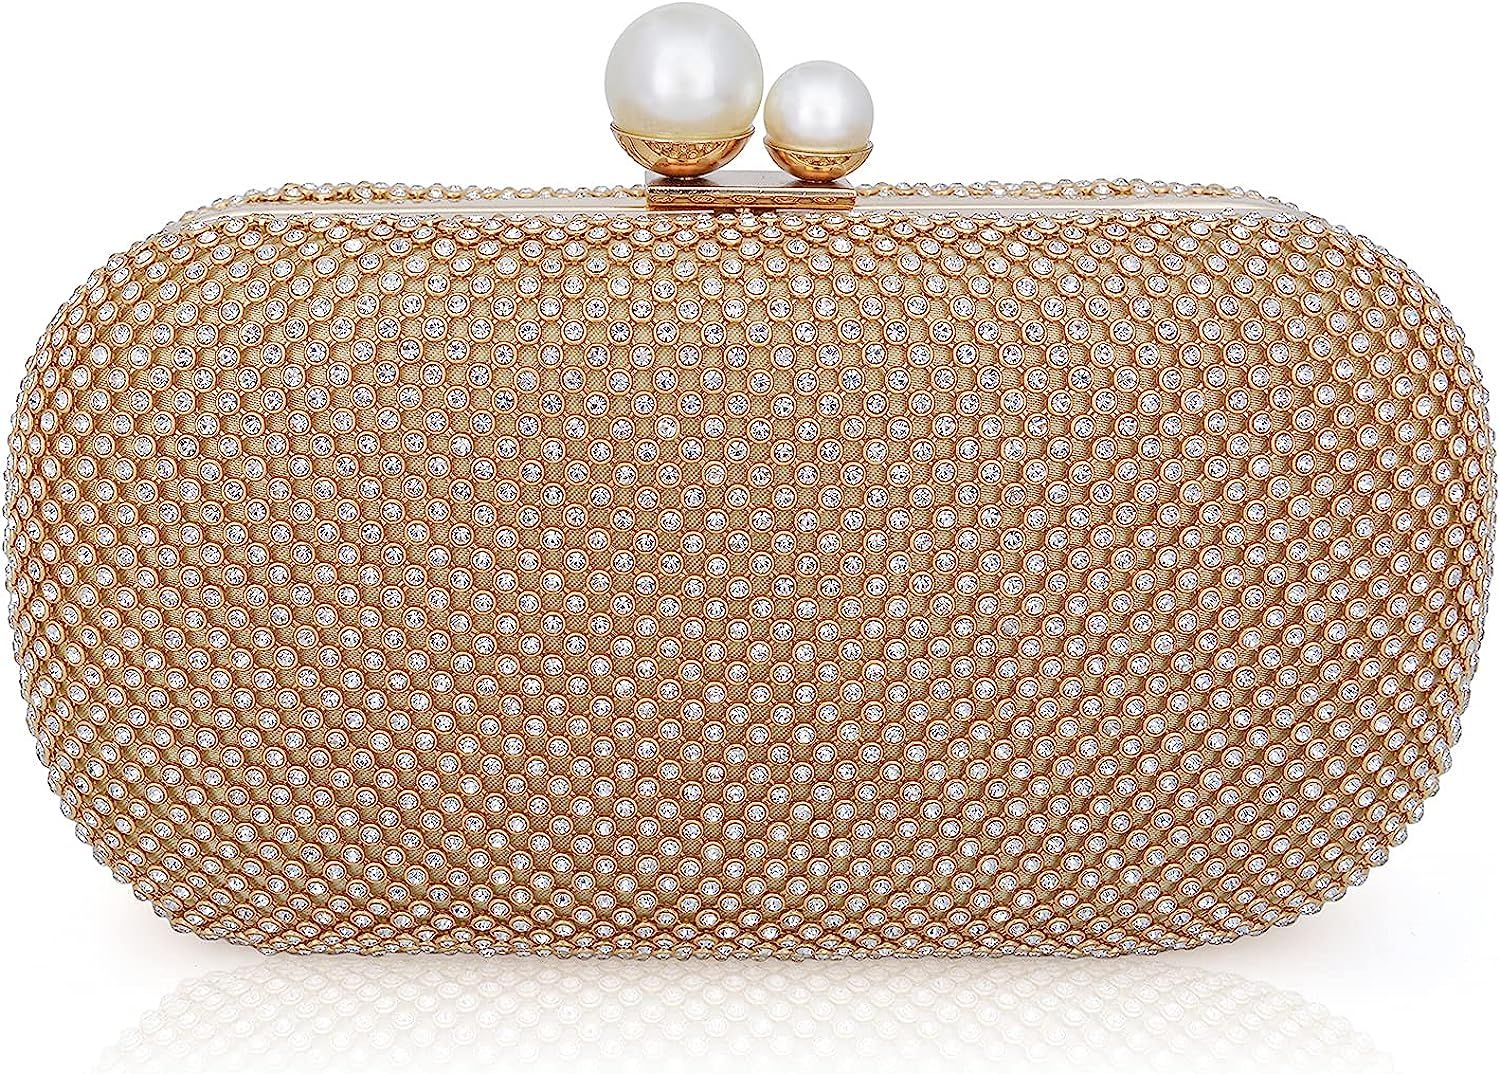 Sumnn Crystal Evening Clutch Woman Evening Bag For Party and wedding | Amazon (US)